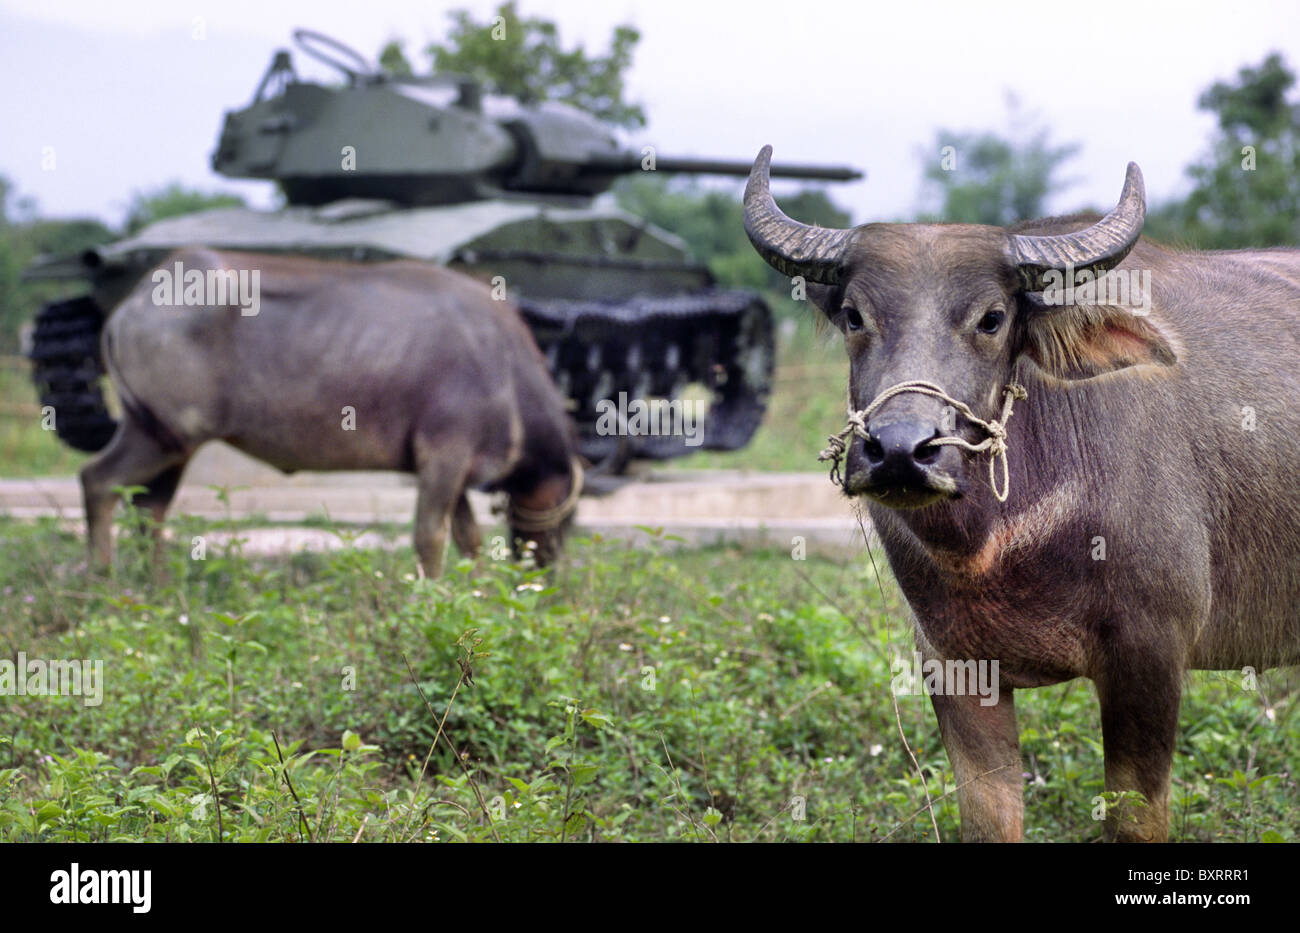 Water buffaloes grazing in front of an old French tank at Dien Bien Phu battle field. Vietnam. Stock Photo